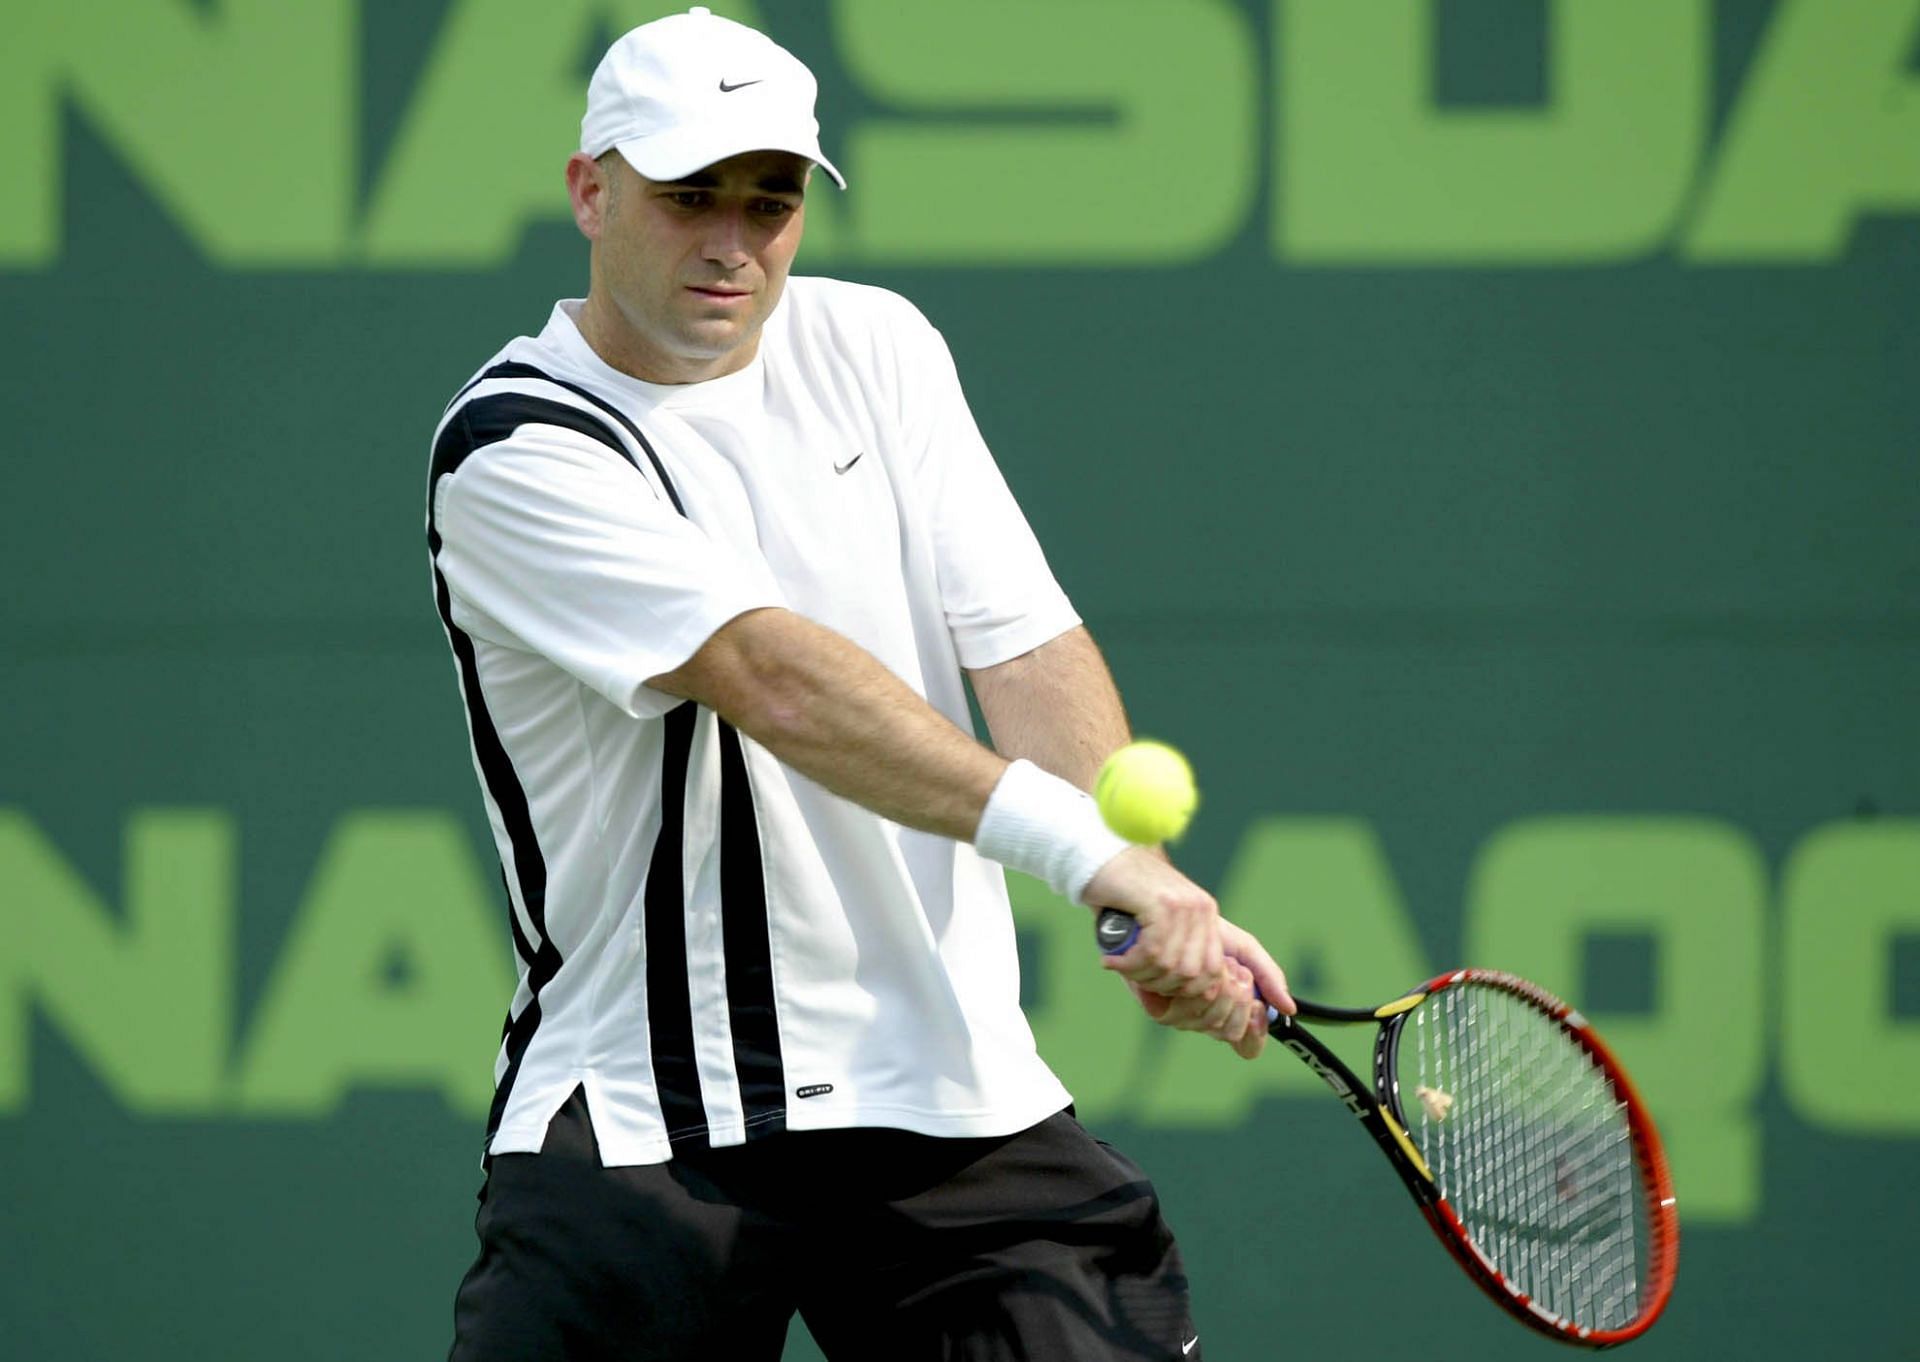 Andre Agassi in action against Michael Chang in 2003